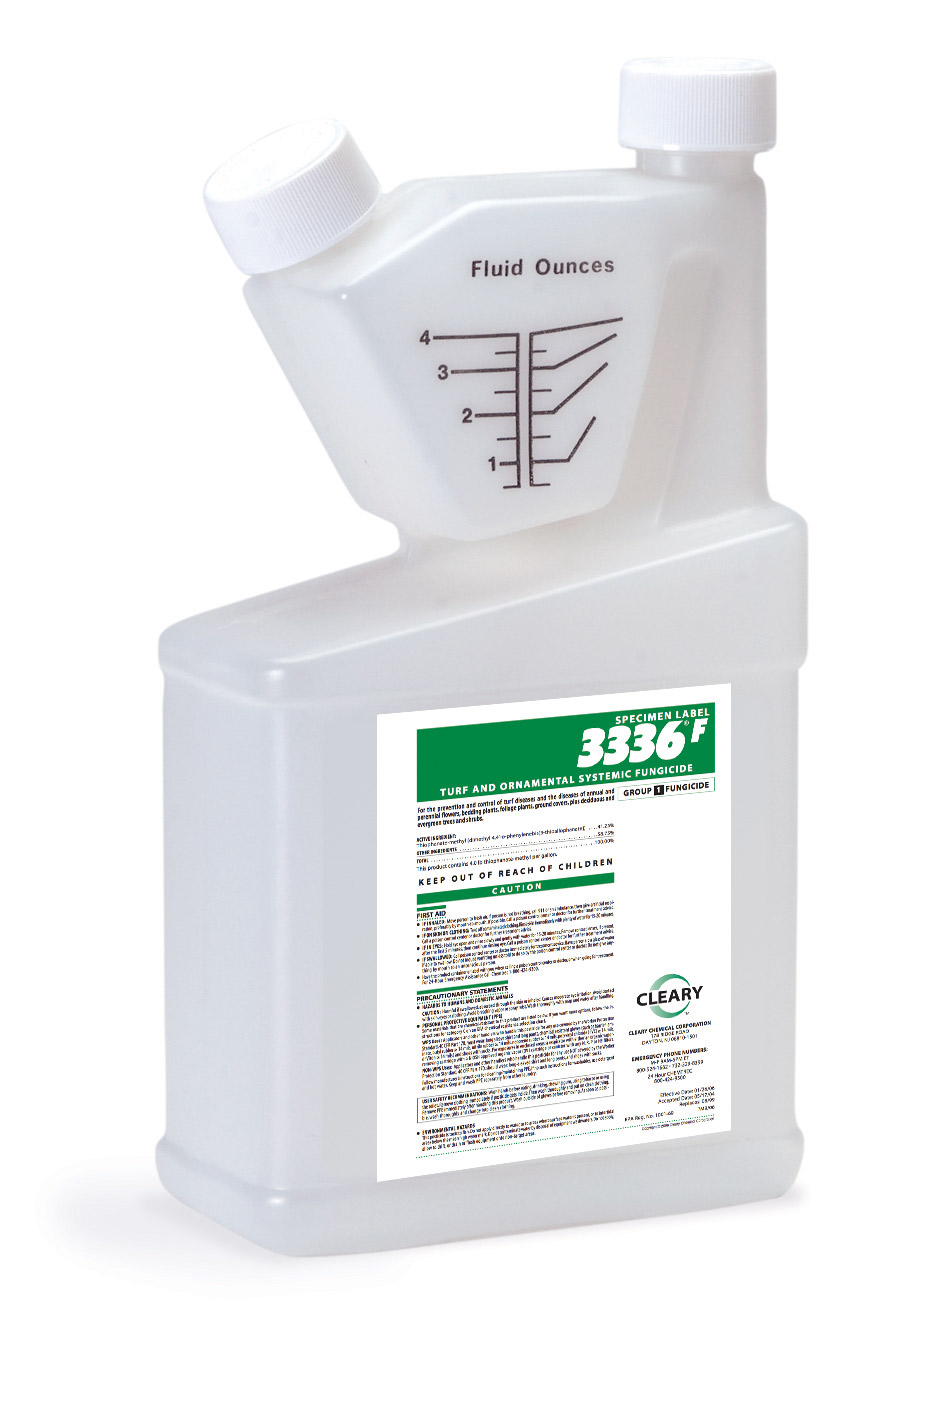 Cleary 3336F 1 Quart Bottle - Fungicides